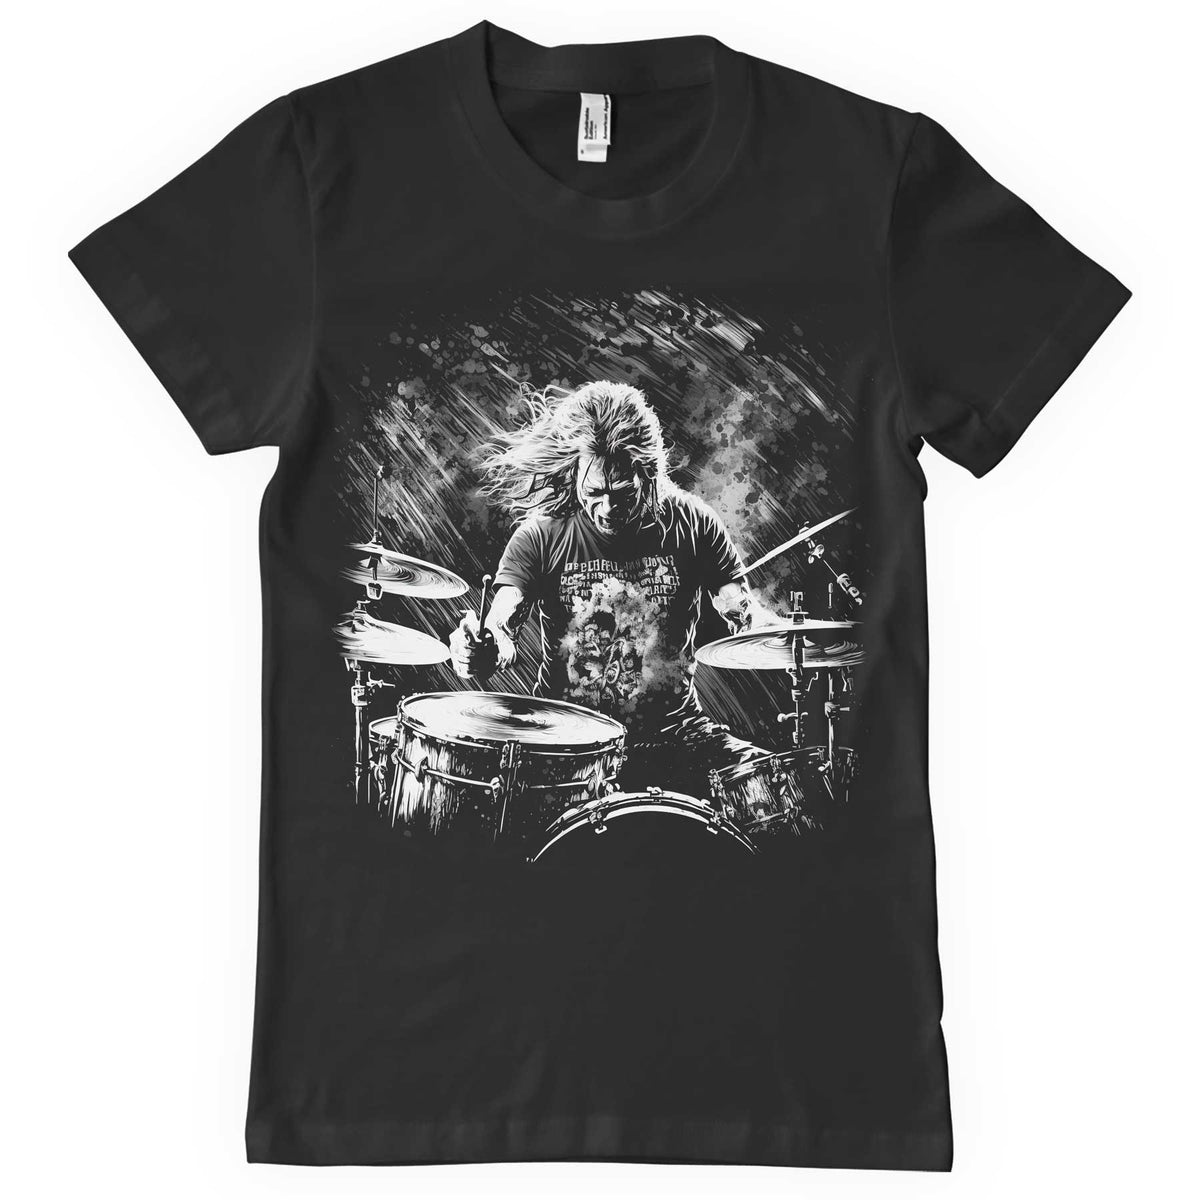 Rock and Roll Drummer T-Shirt